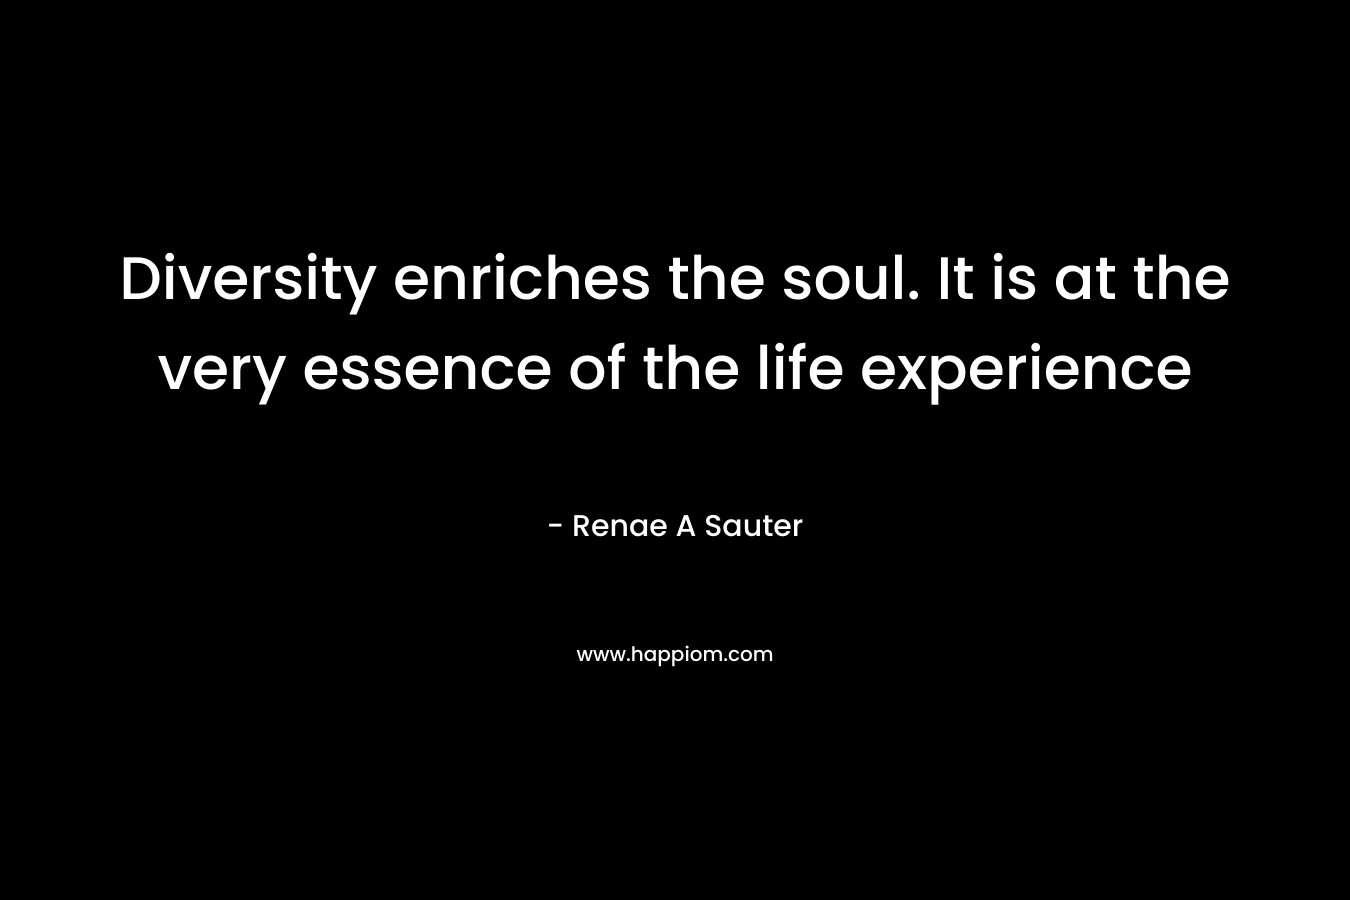 Diversity enriches the soul. It is at the very essence of the life experience – Renae A Sauter